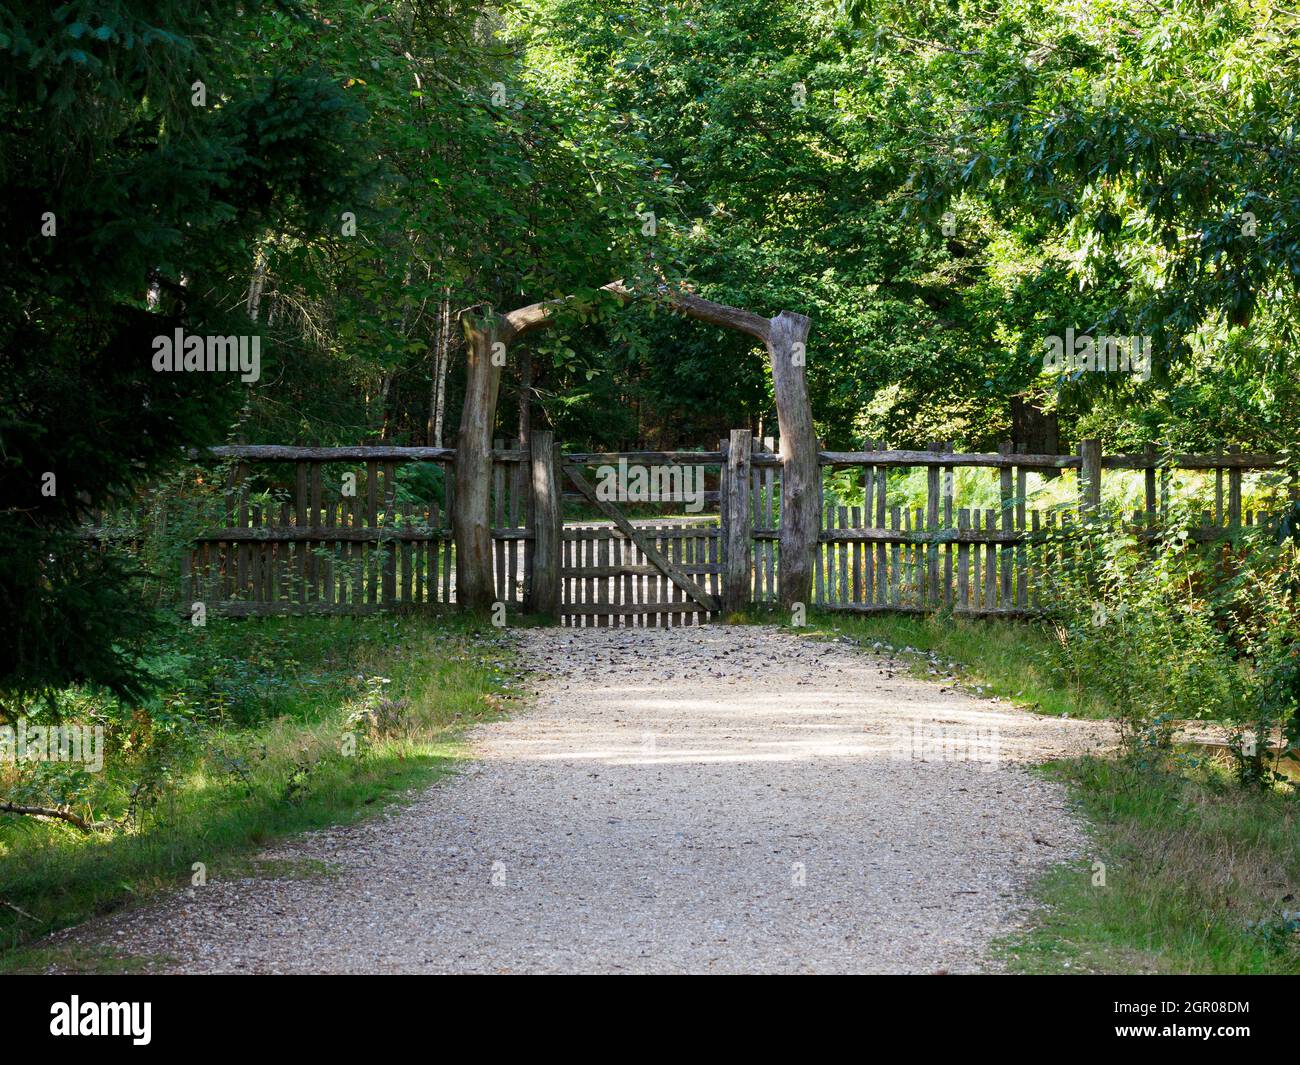 Footpath through the forest to a wooden gate and arch, Blackwater Arboretum, The New Forest, Hampshire, UK Stock Photo